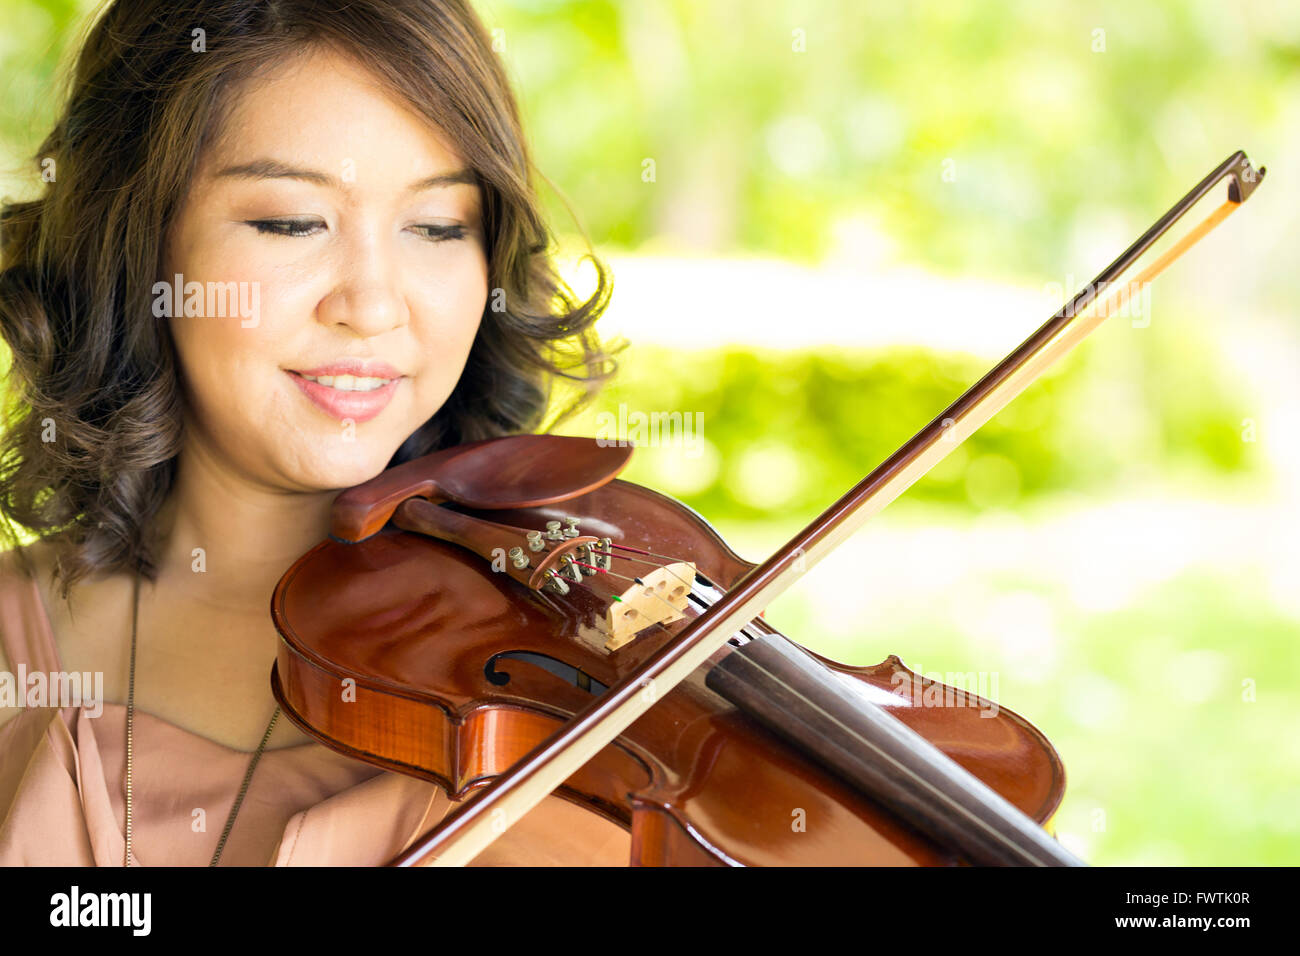 Young woman playing violin in garden Stock Photo